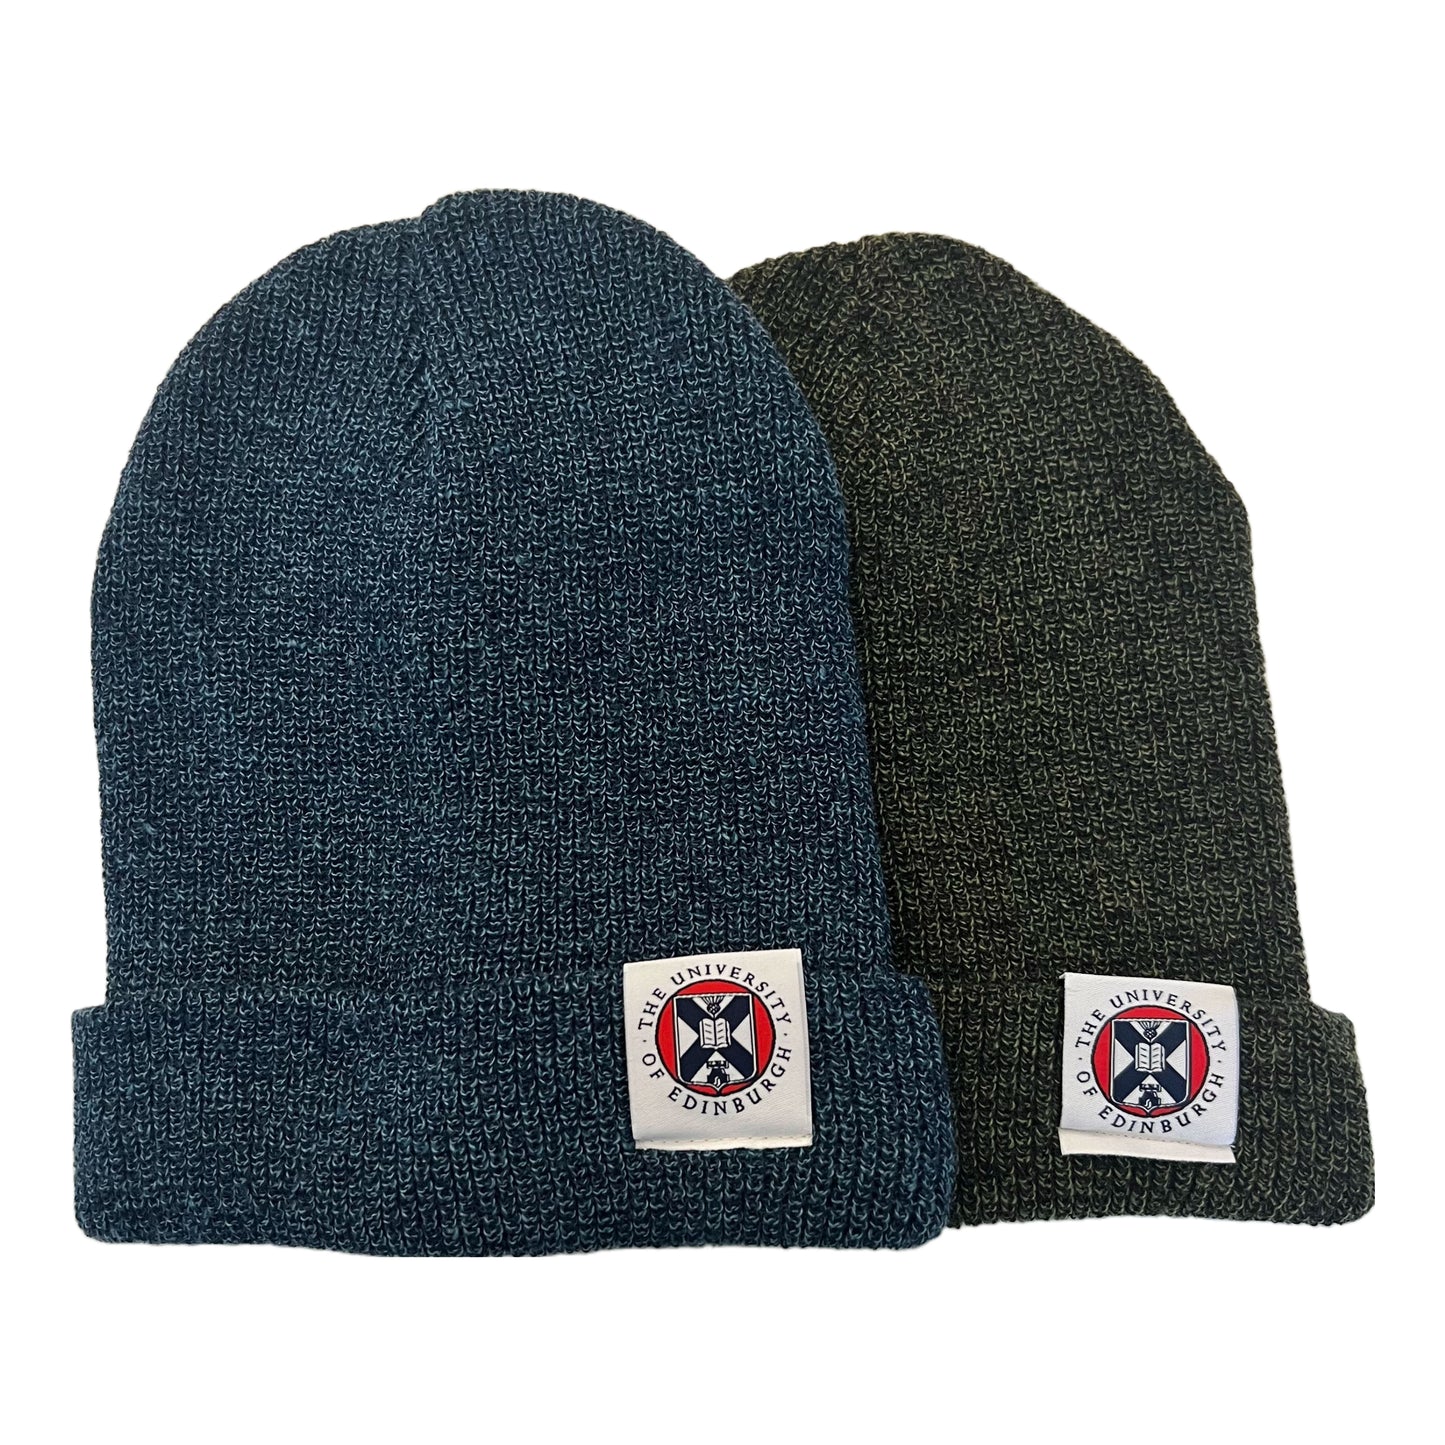 petrol blue and moss green beanies with woven label featuring university crest